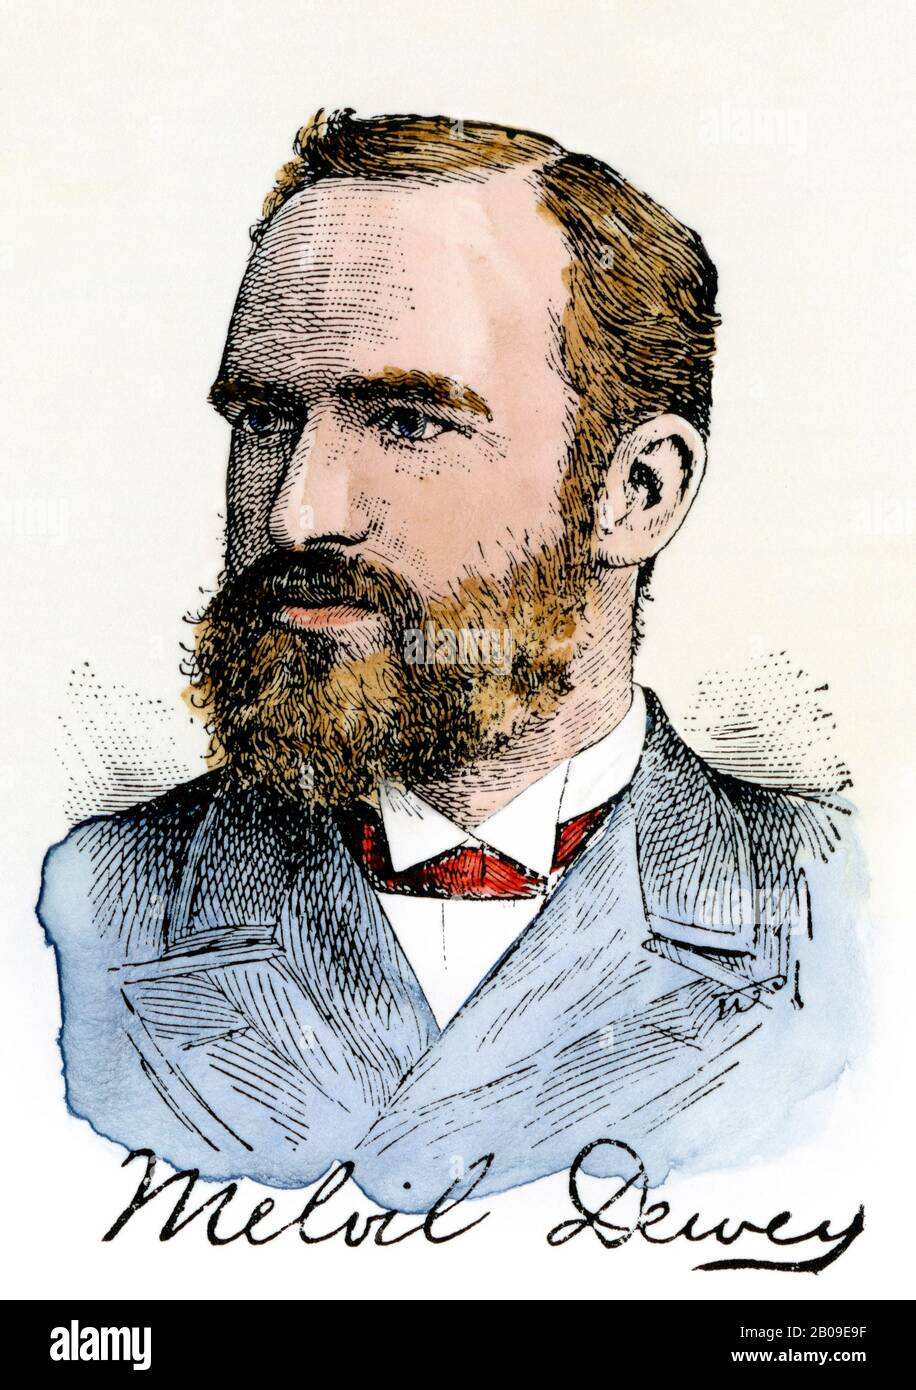 Melvil Dewey, who proposed library decimal classification system. Hand-colored woodcut Stock Photo